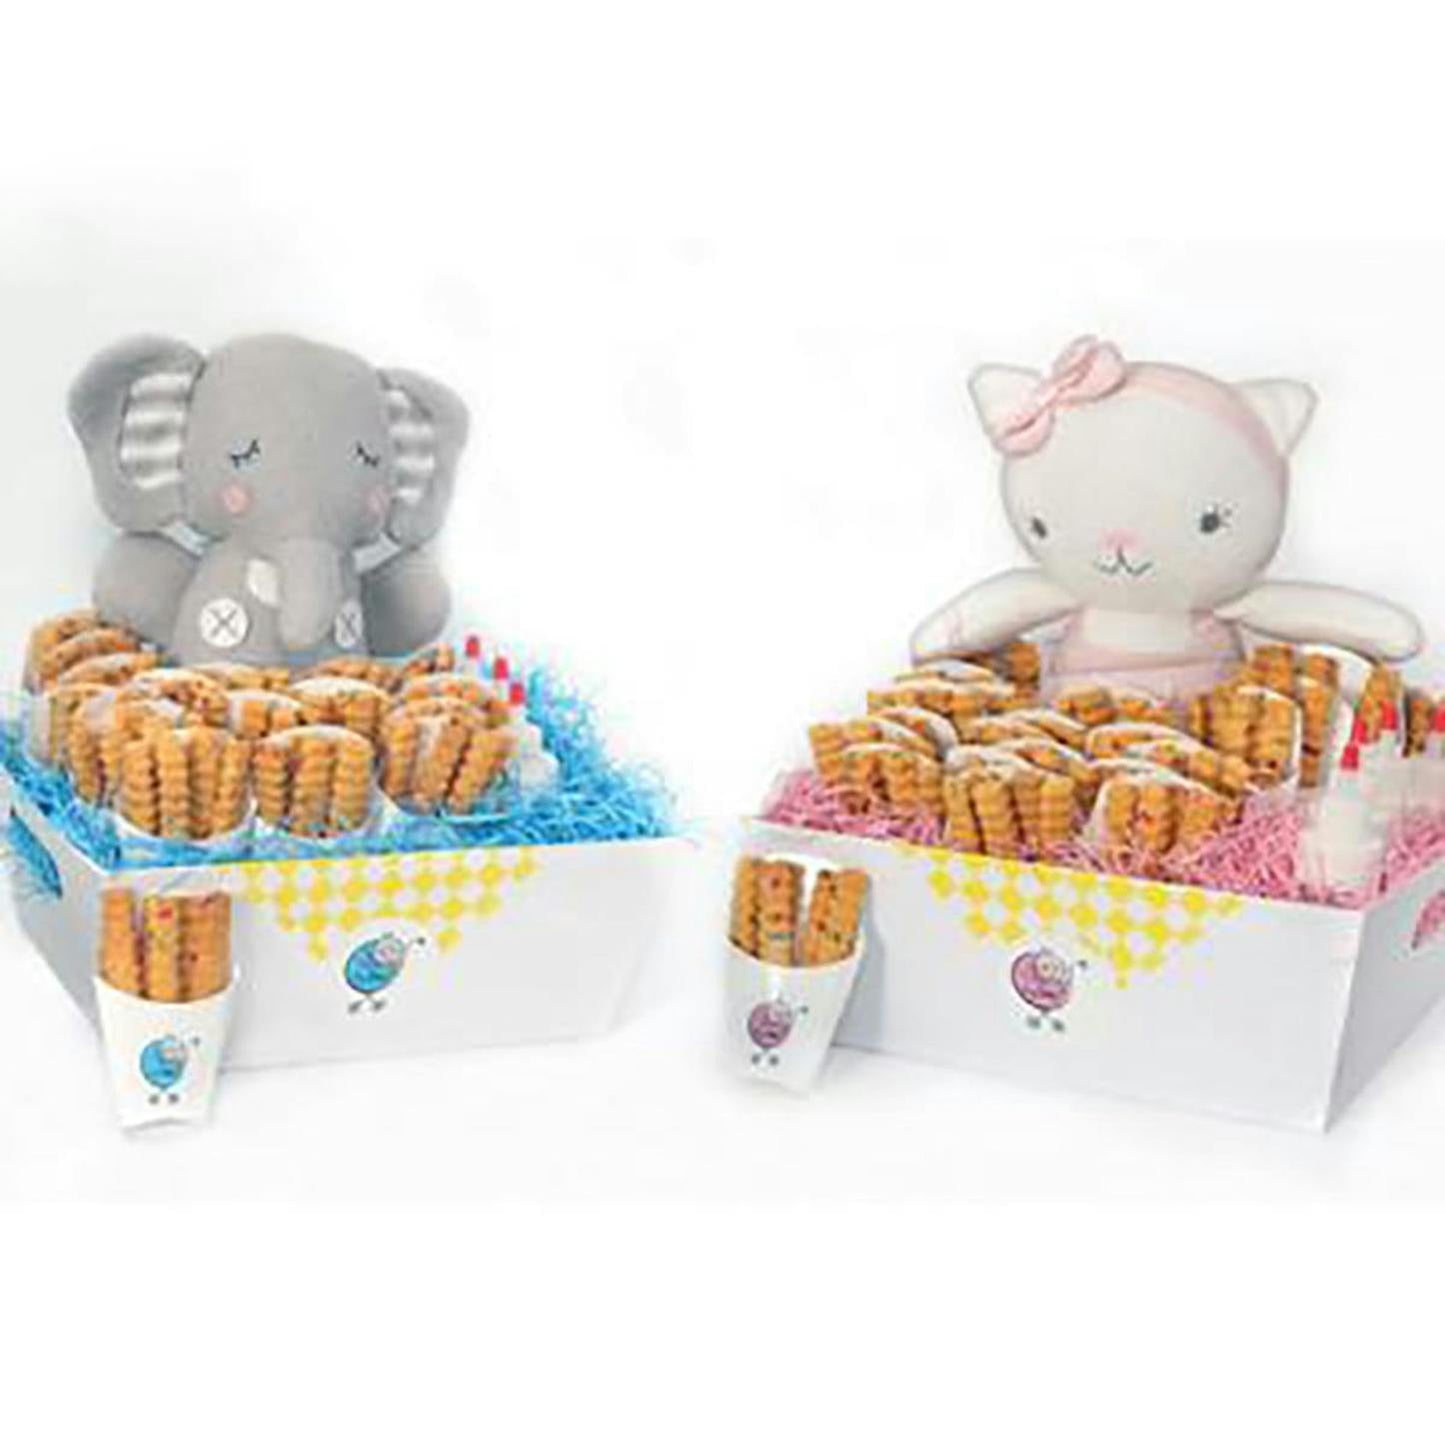 Fry Baby Basket + Plush Toy - 24 Cartons Cookie Fries